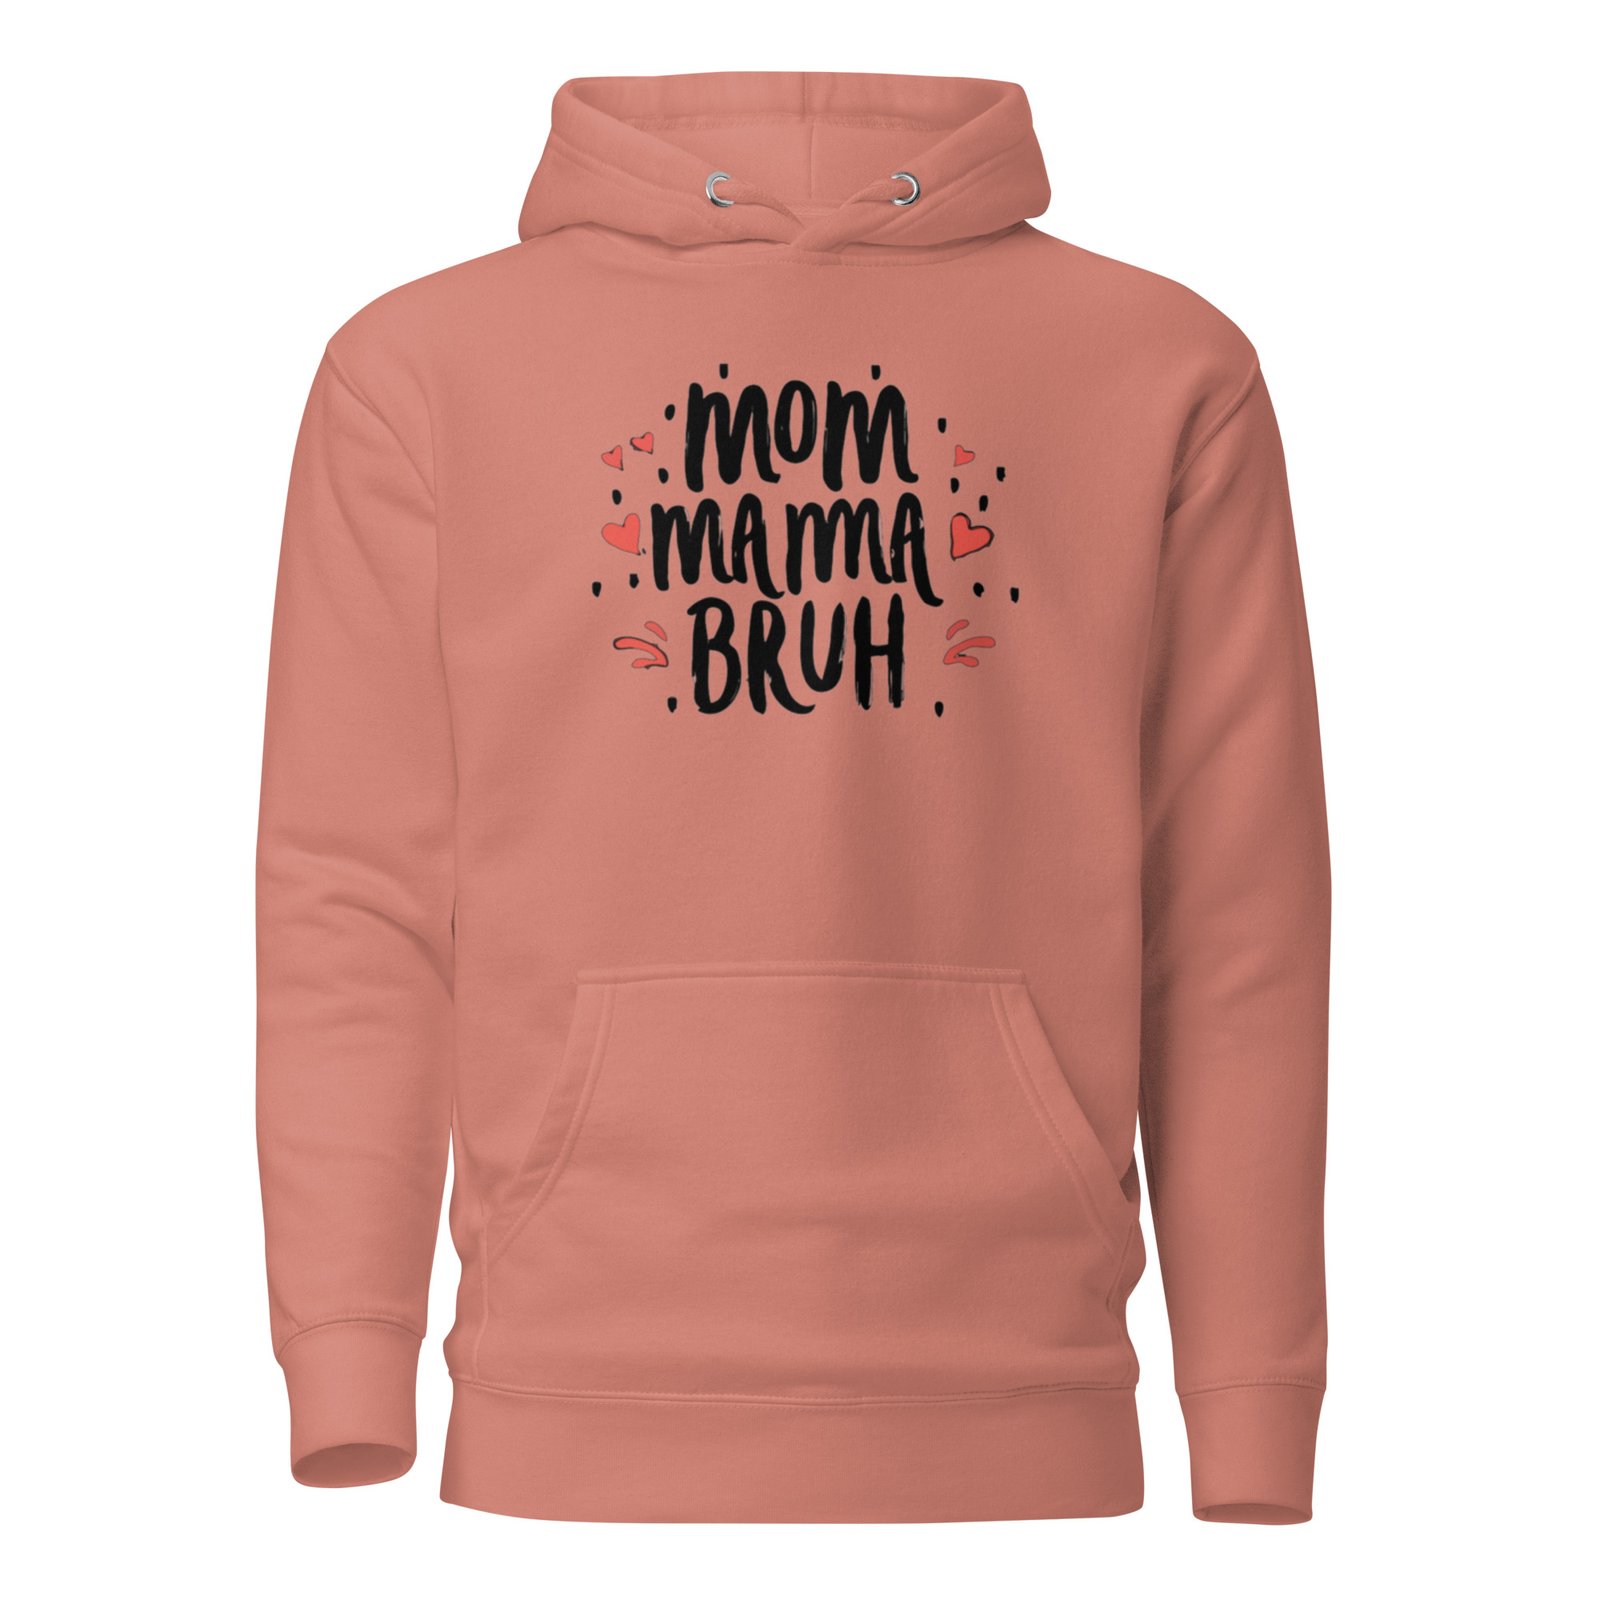 unisex premium hoodie dusty rose front 65c4002614148 - Mama Clothing Store - For Great Mamas